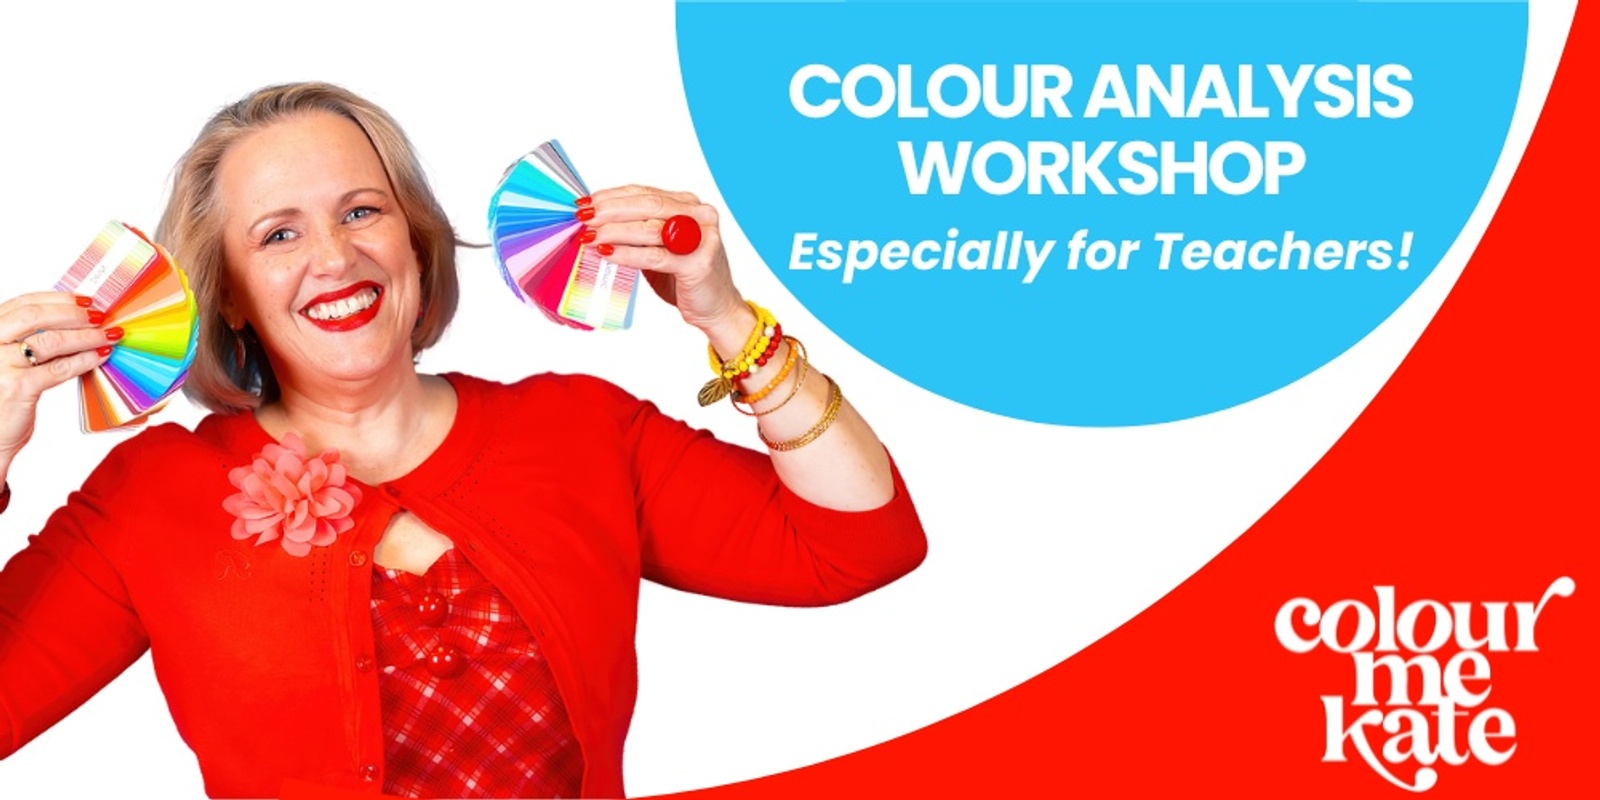 Banner image for Colour Analysis Workshop - Especially for Teachers